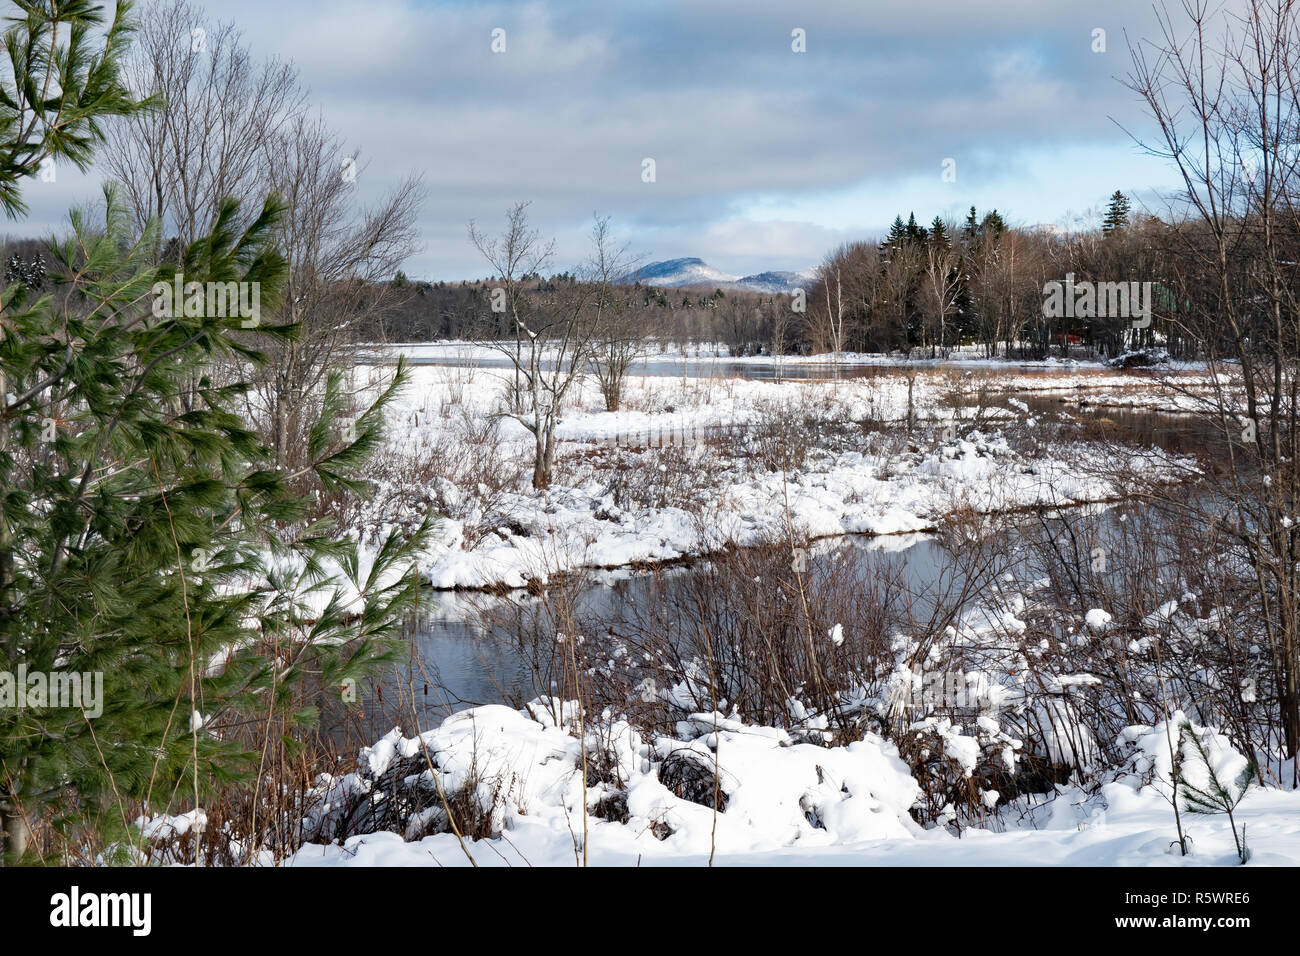 A winter landscape or snowscape of the Sacandaga River valley near Speculator, NY USA in the Adirondack Mountains. Stock Photo